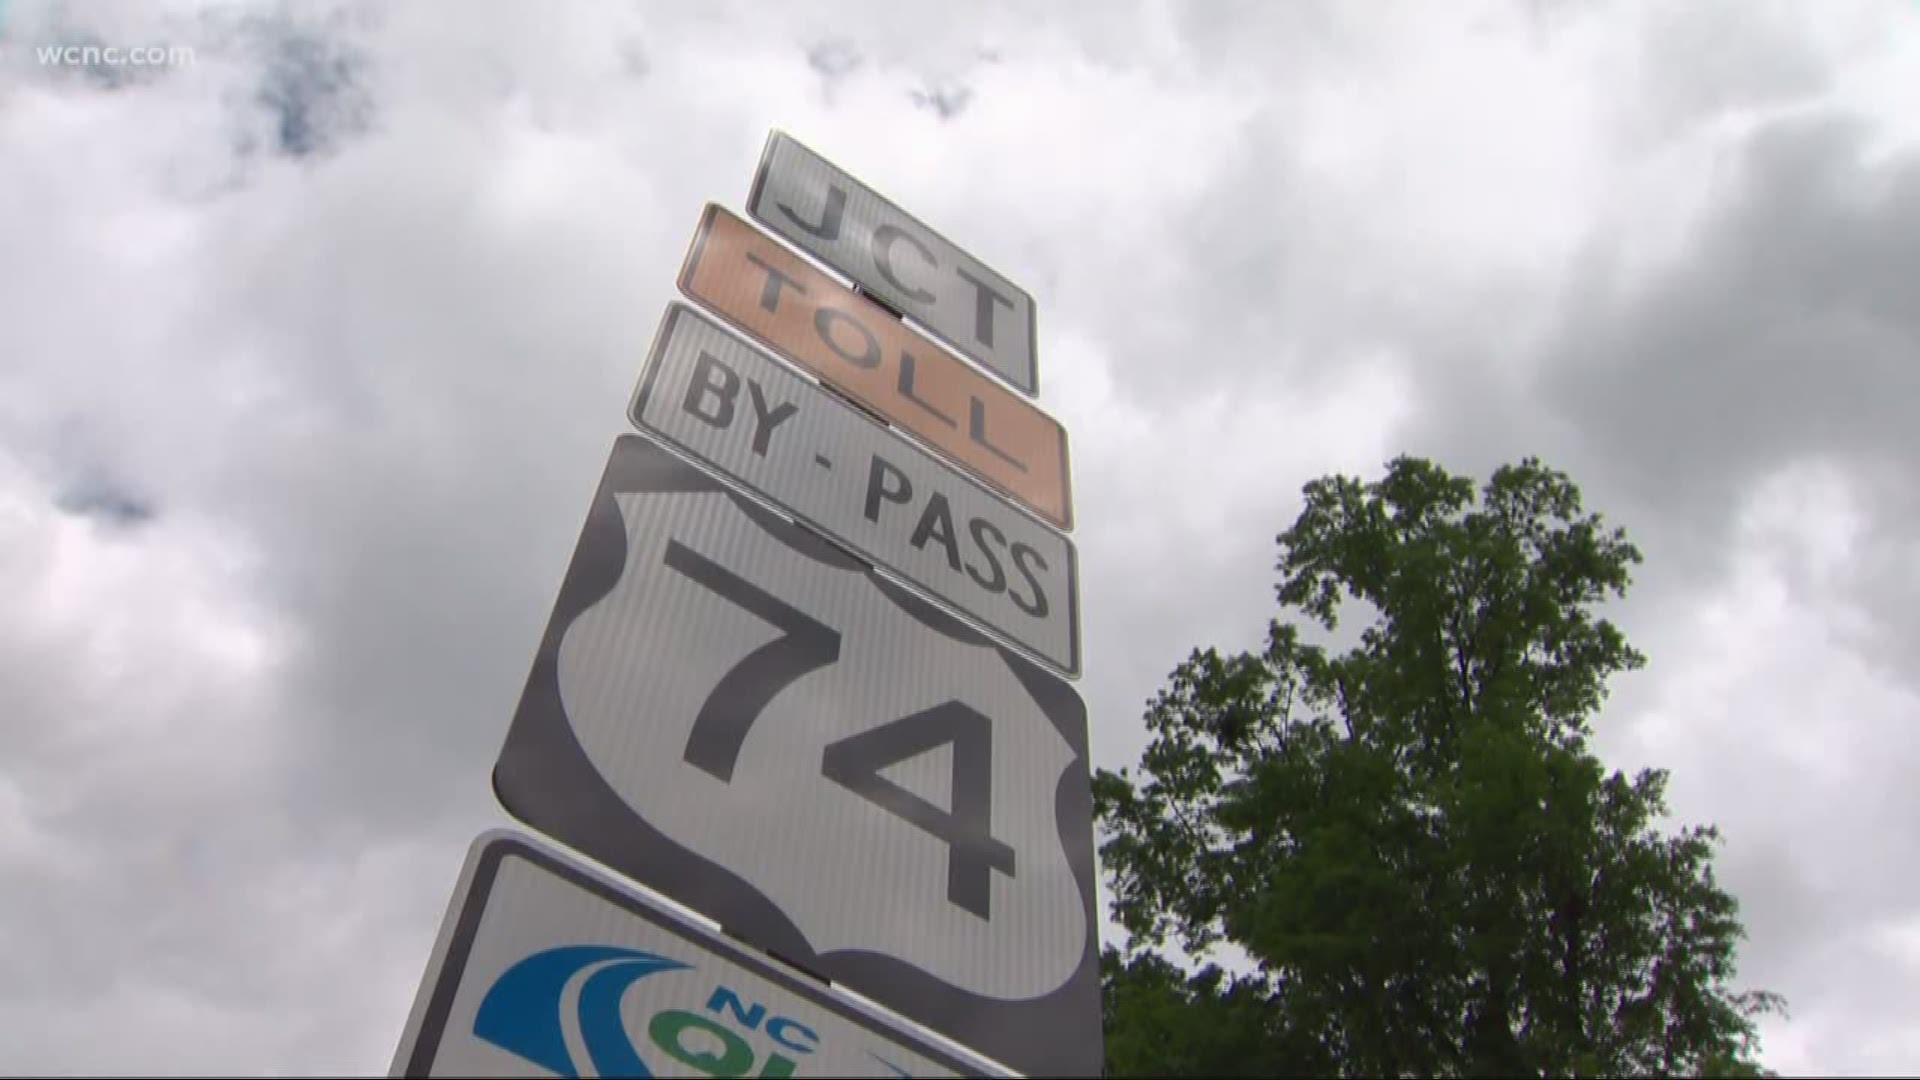 Most people who drive on the expressway don't have a quick pass, so it's up to cameras to snap a picture of their license plate. Then, it's up to the state to send a bill. Some people have reported bills that were late by weeks, even months.